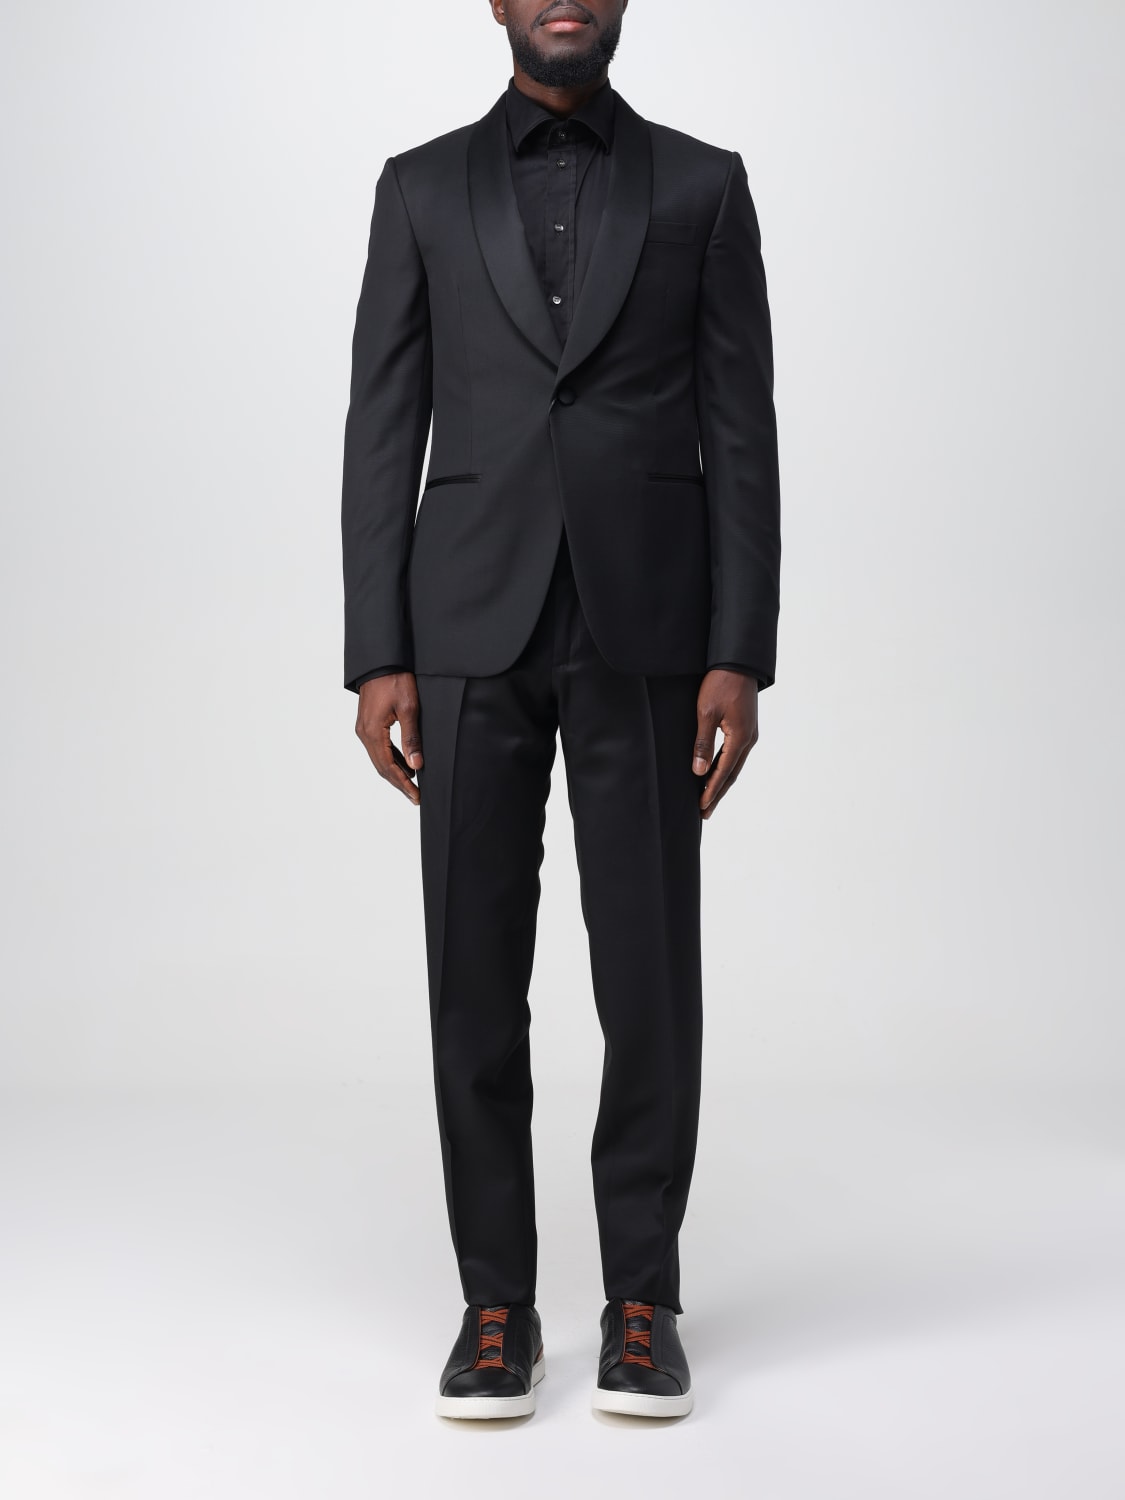 ZEGNA: suit in wool and mohair - Black | ZEGNA suit 2830GQ622776A6 ...